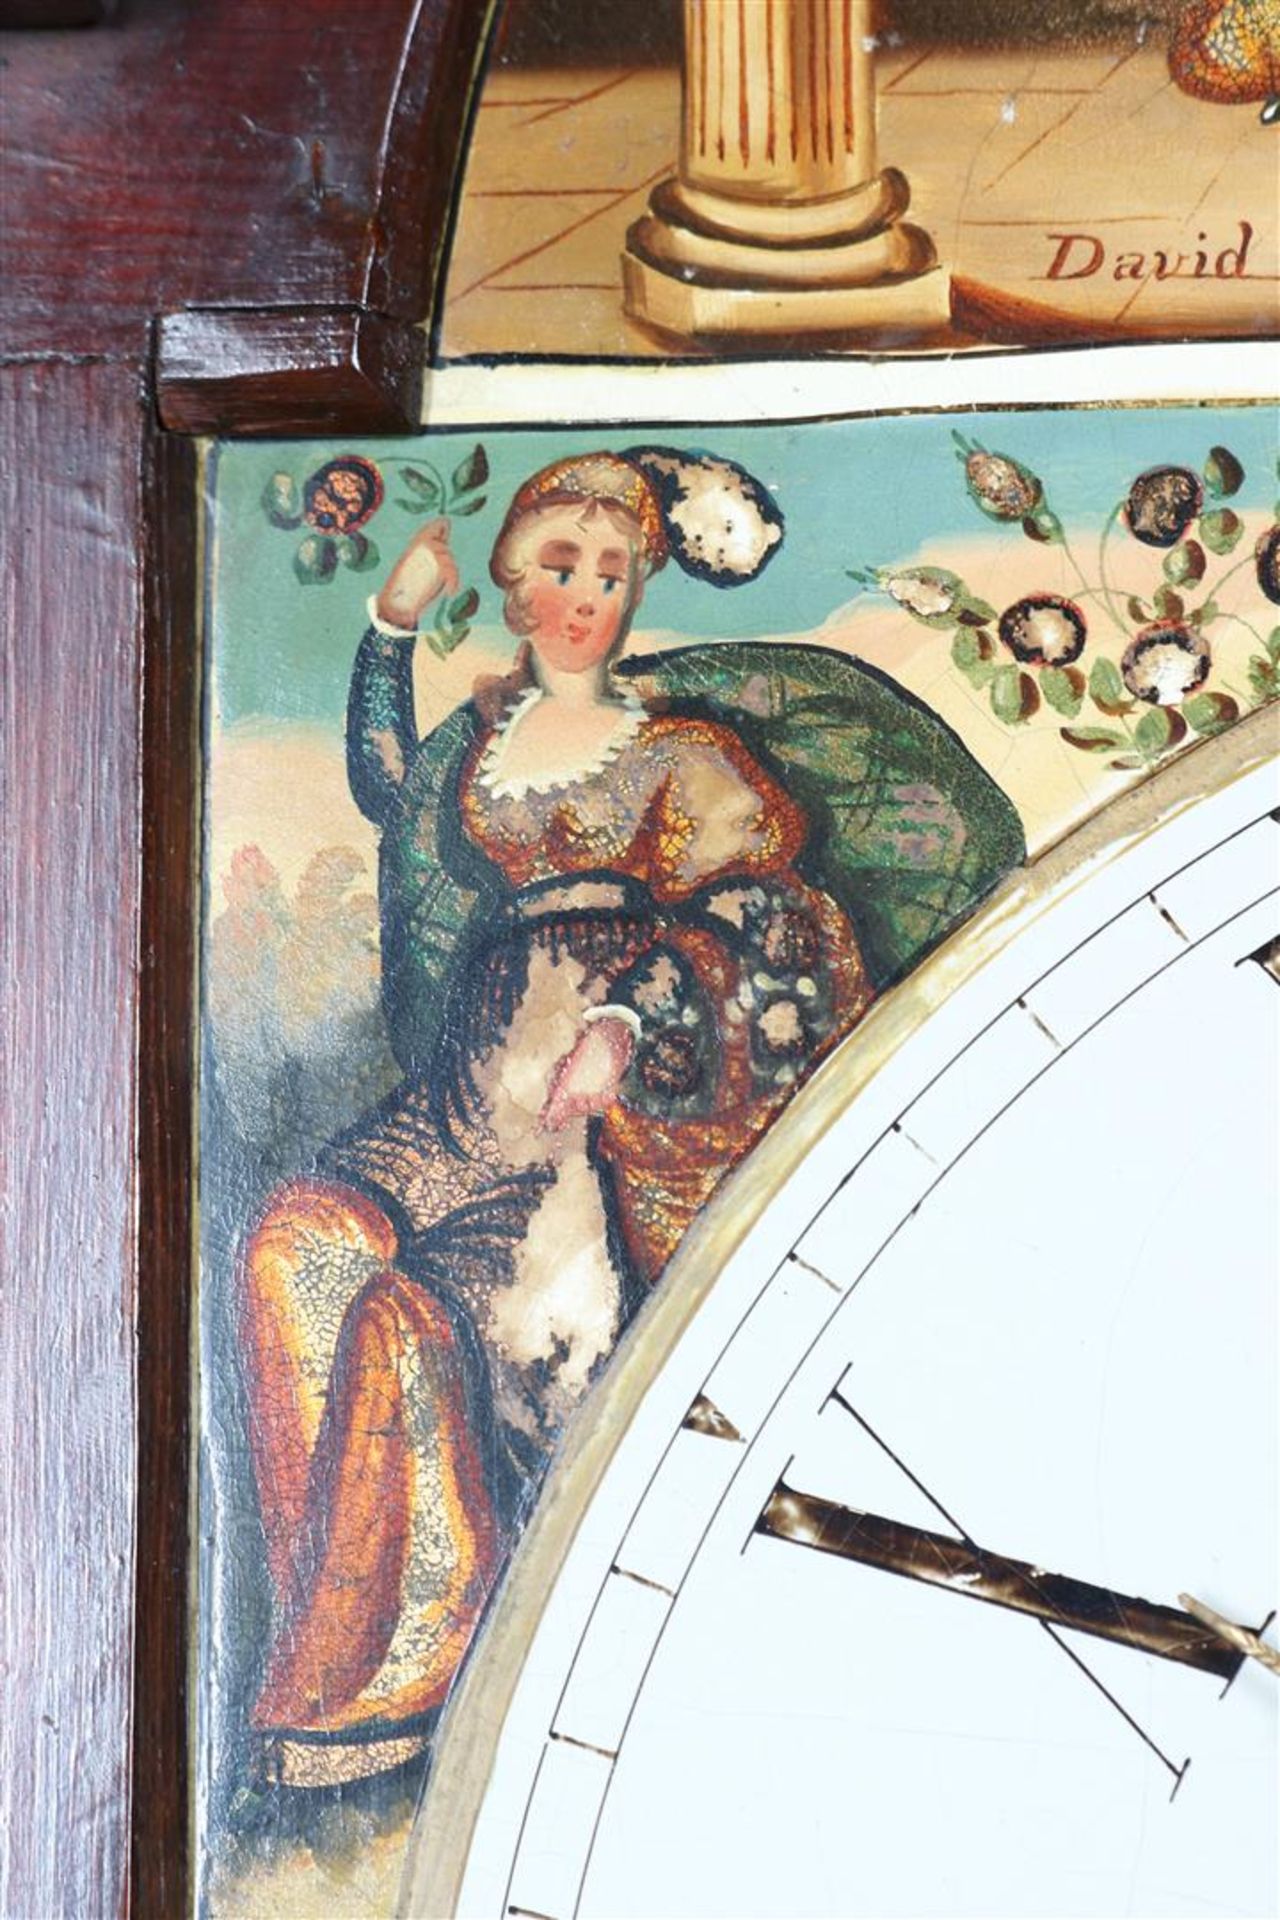 Longcase watch with painted dial, images of "David Playing before Saul" and the 4 seasons, England - Image 7 of 10